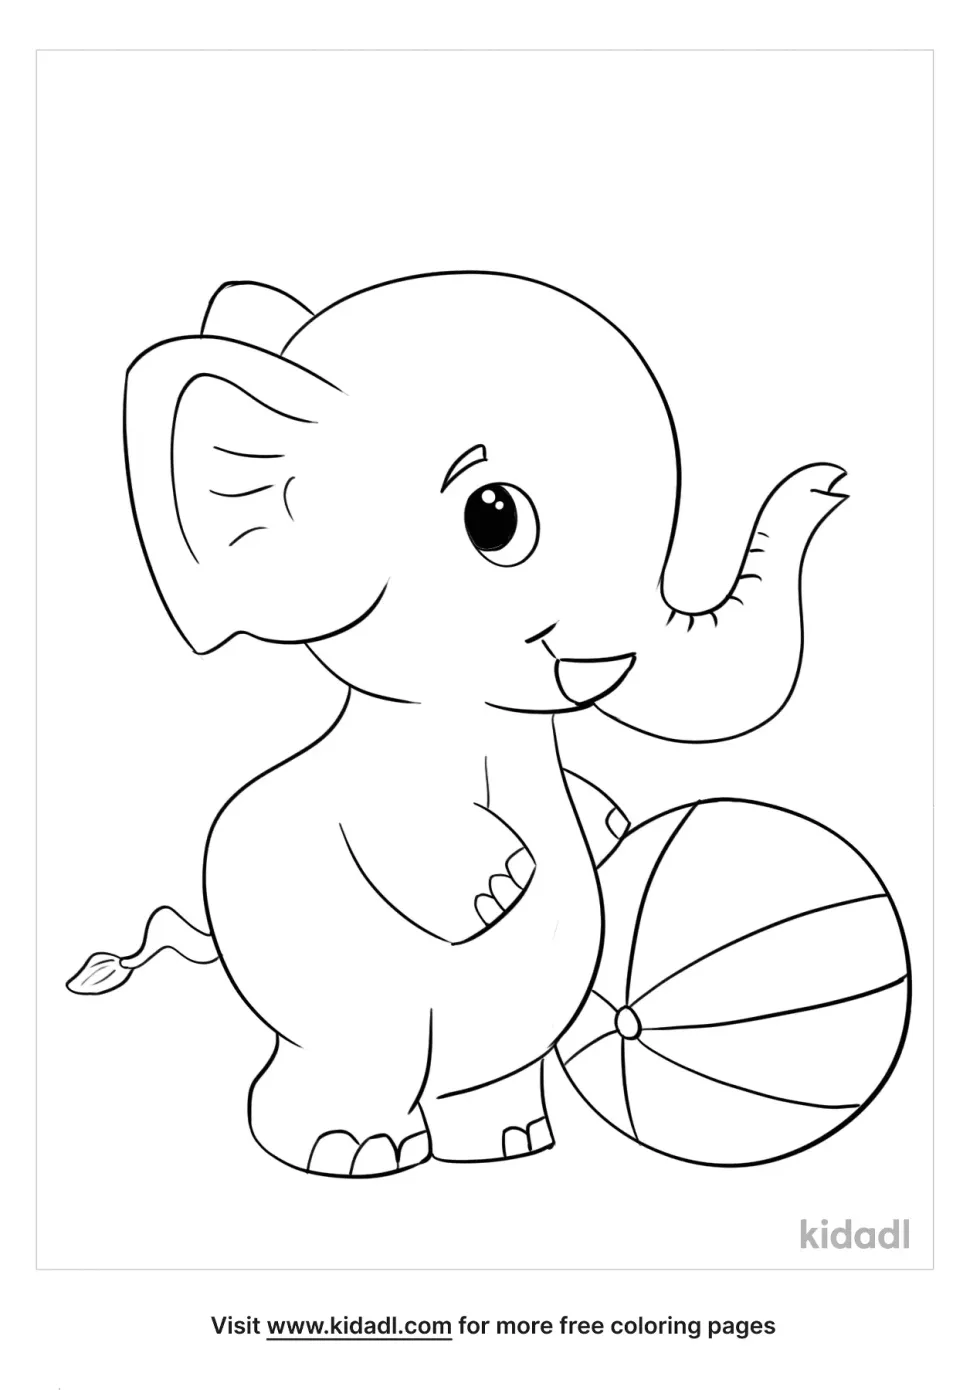 Elephant For Preschoolers Coloring Page